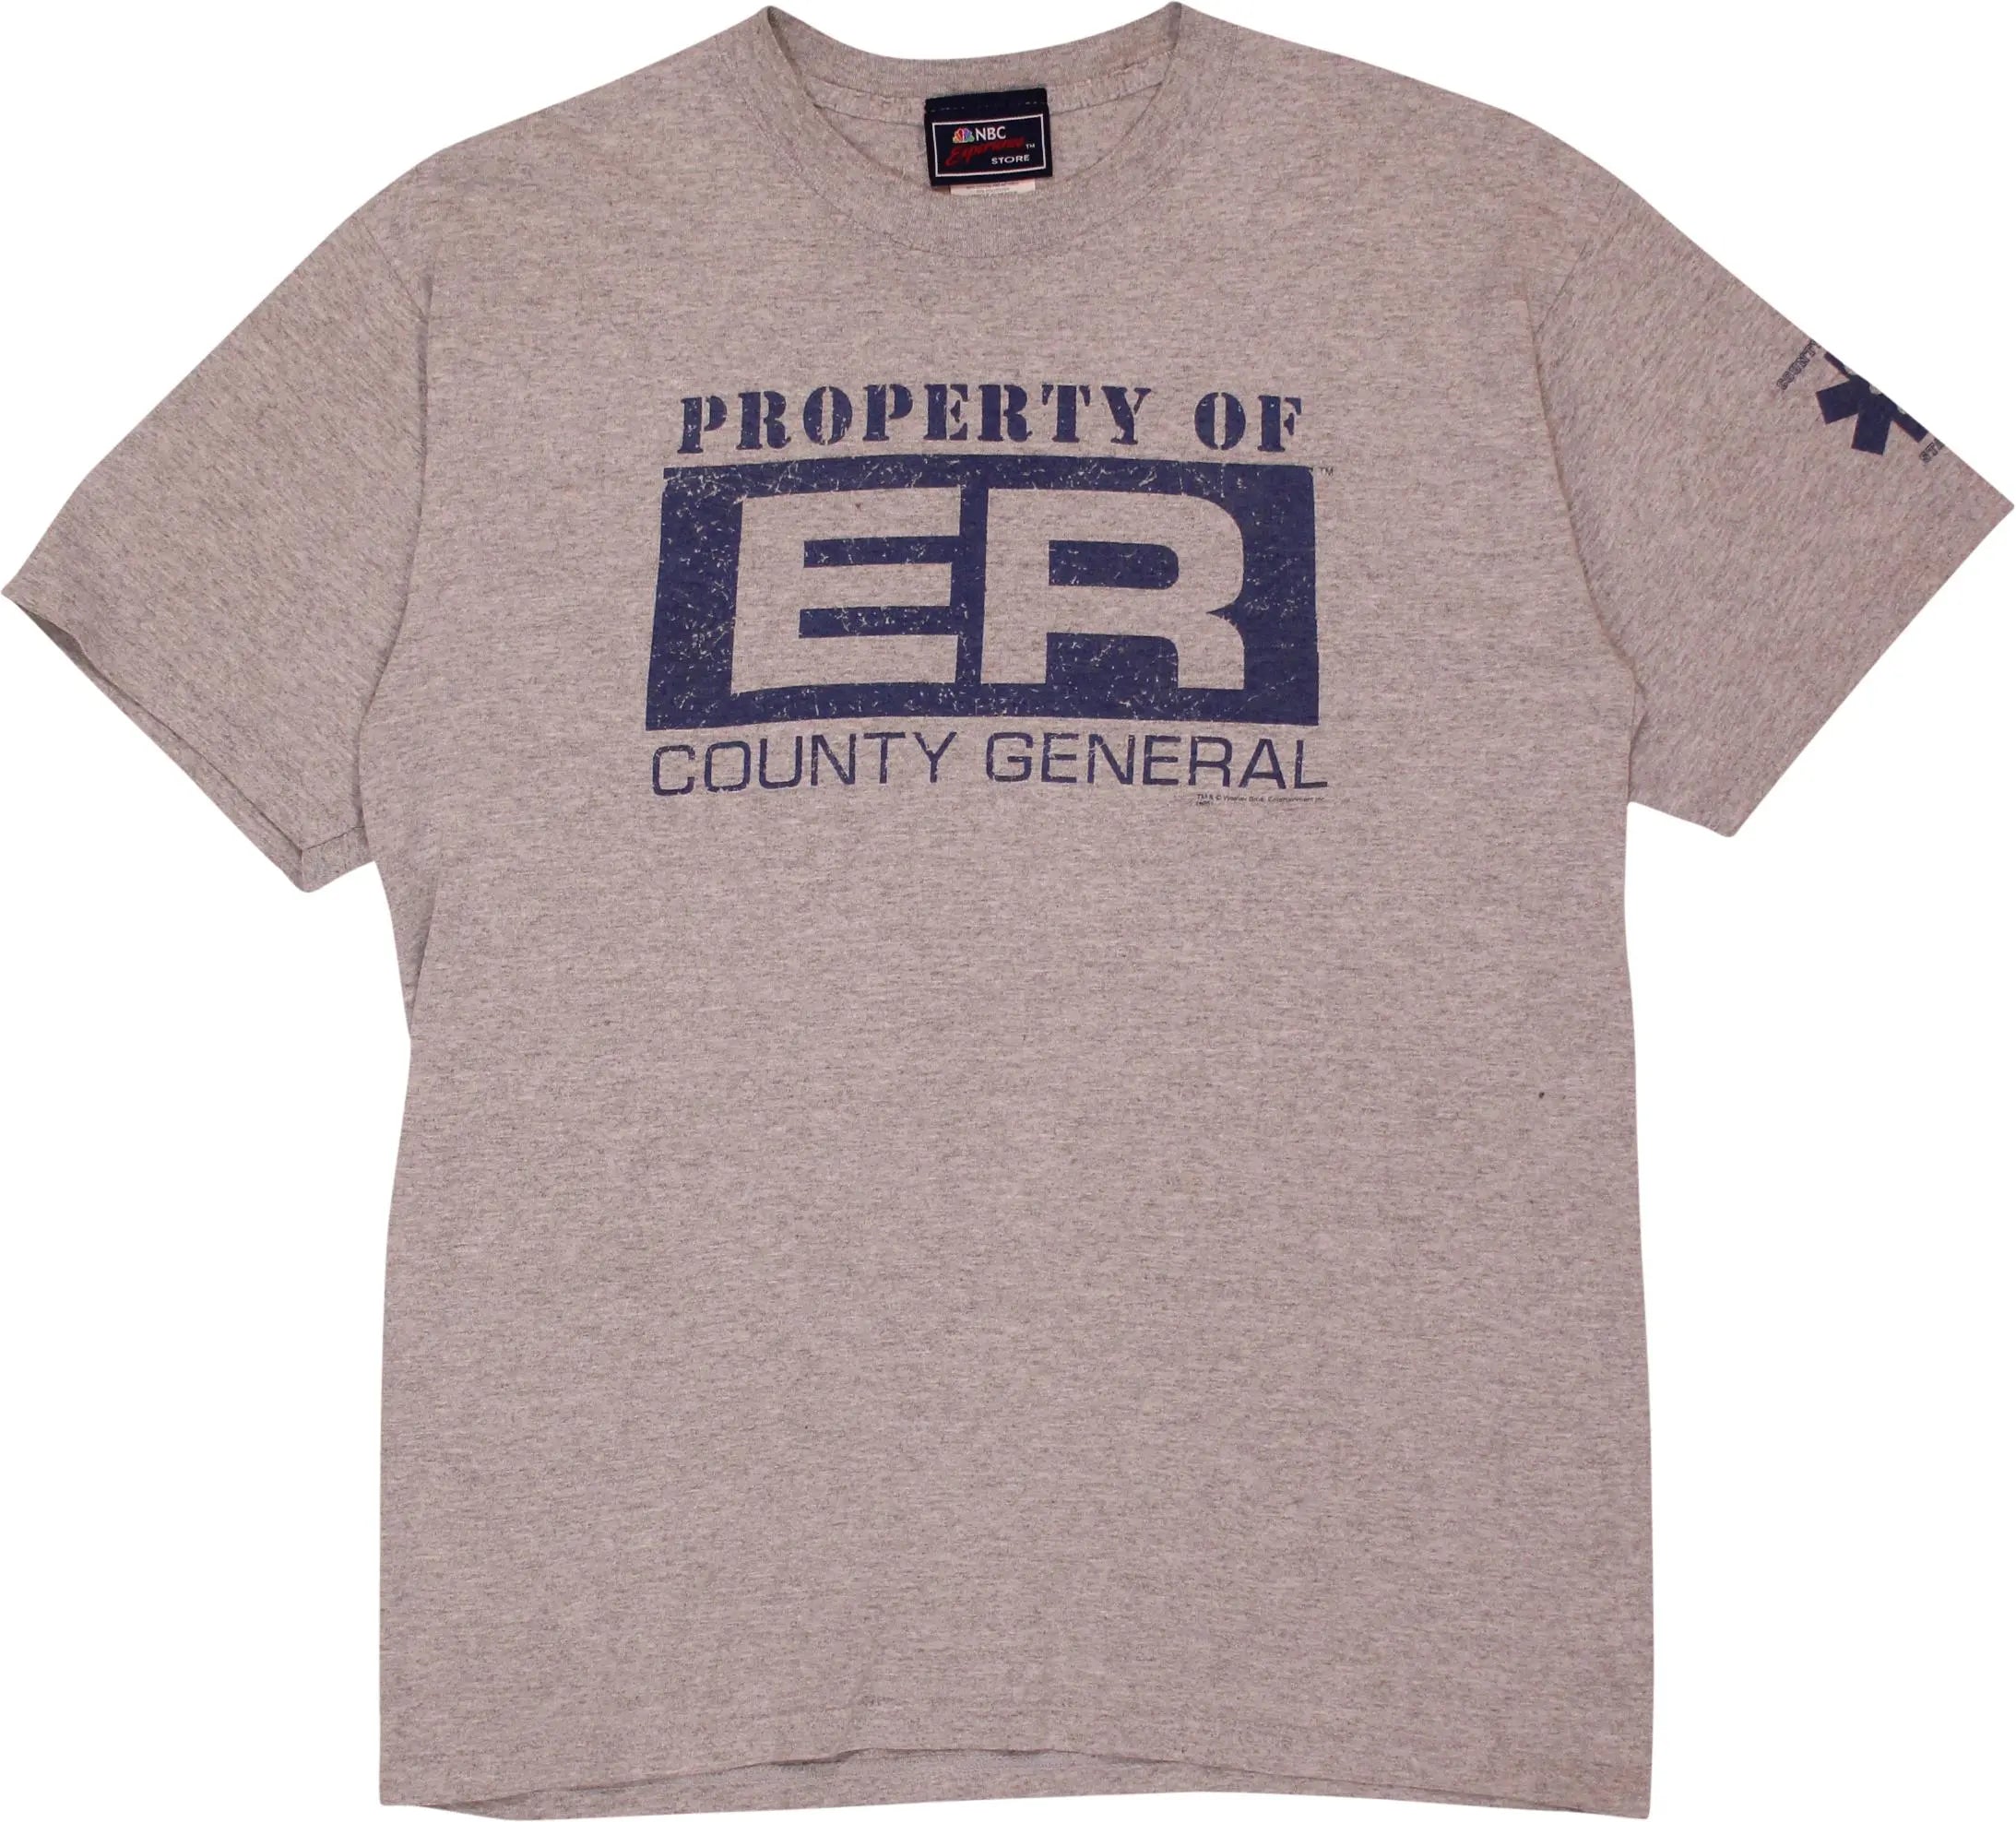 NBC Experience - Vintage ER Property of County General T-shirt- ThriftTale.com - Vintage and second handclothing